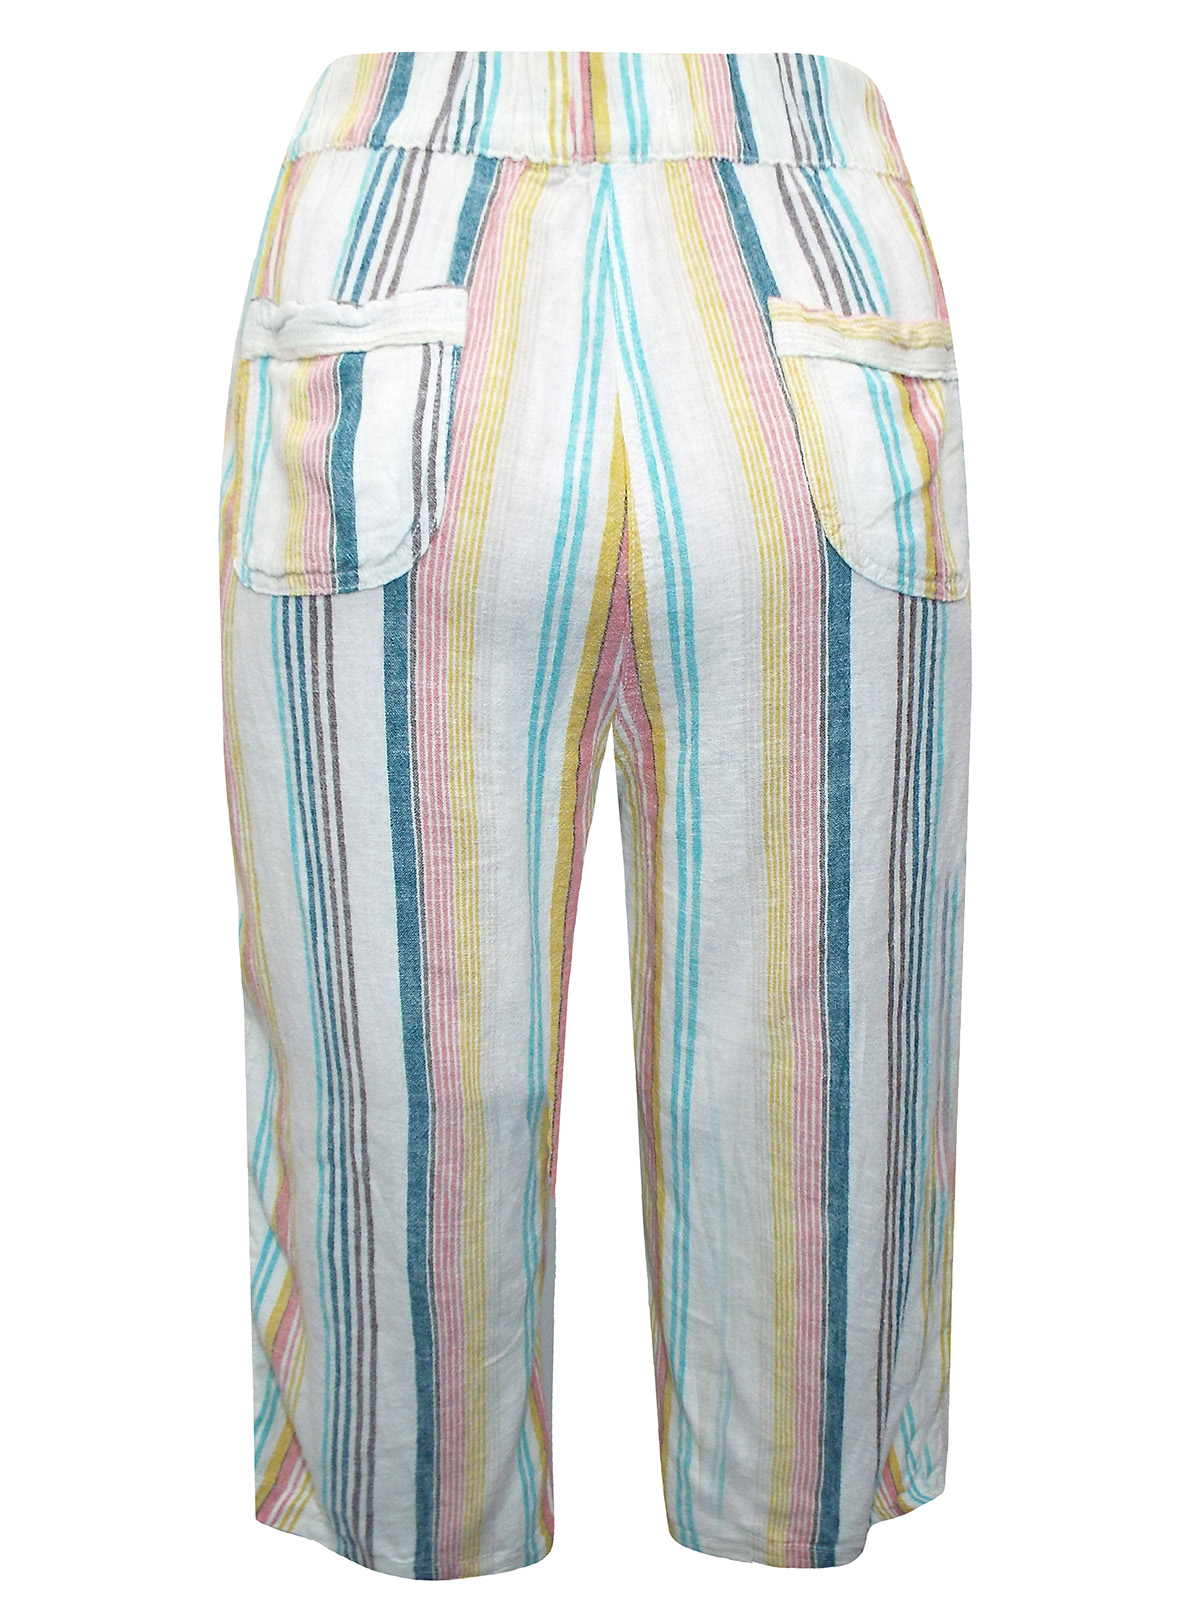 Marks and Spencer - - M&5 MULTI Linen Blend Striped Cropped Trousers